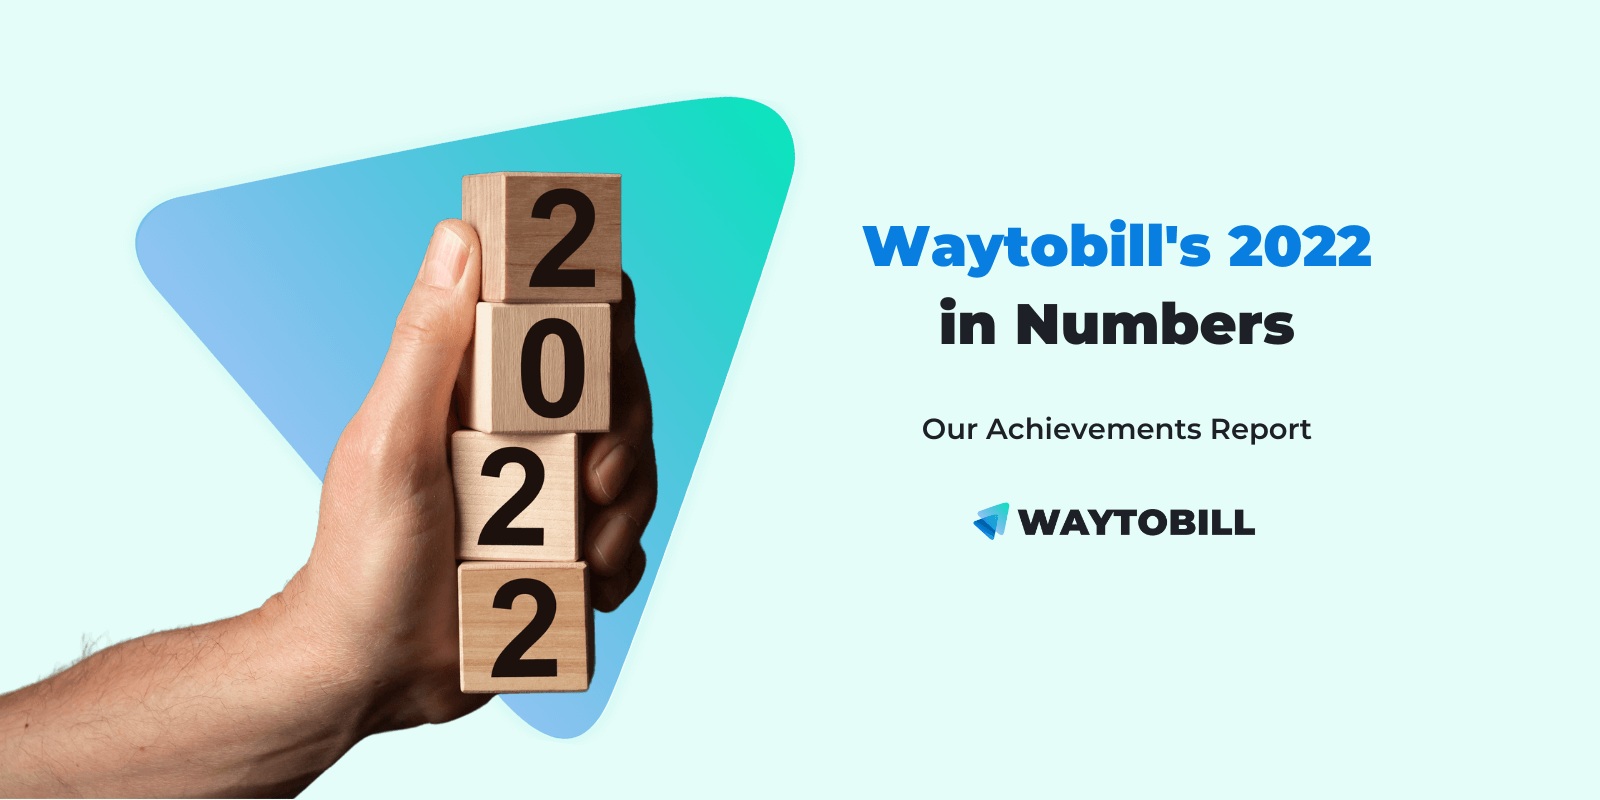 Steady Growth and Progress: Waytobill’s 2022 Report and Achievements